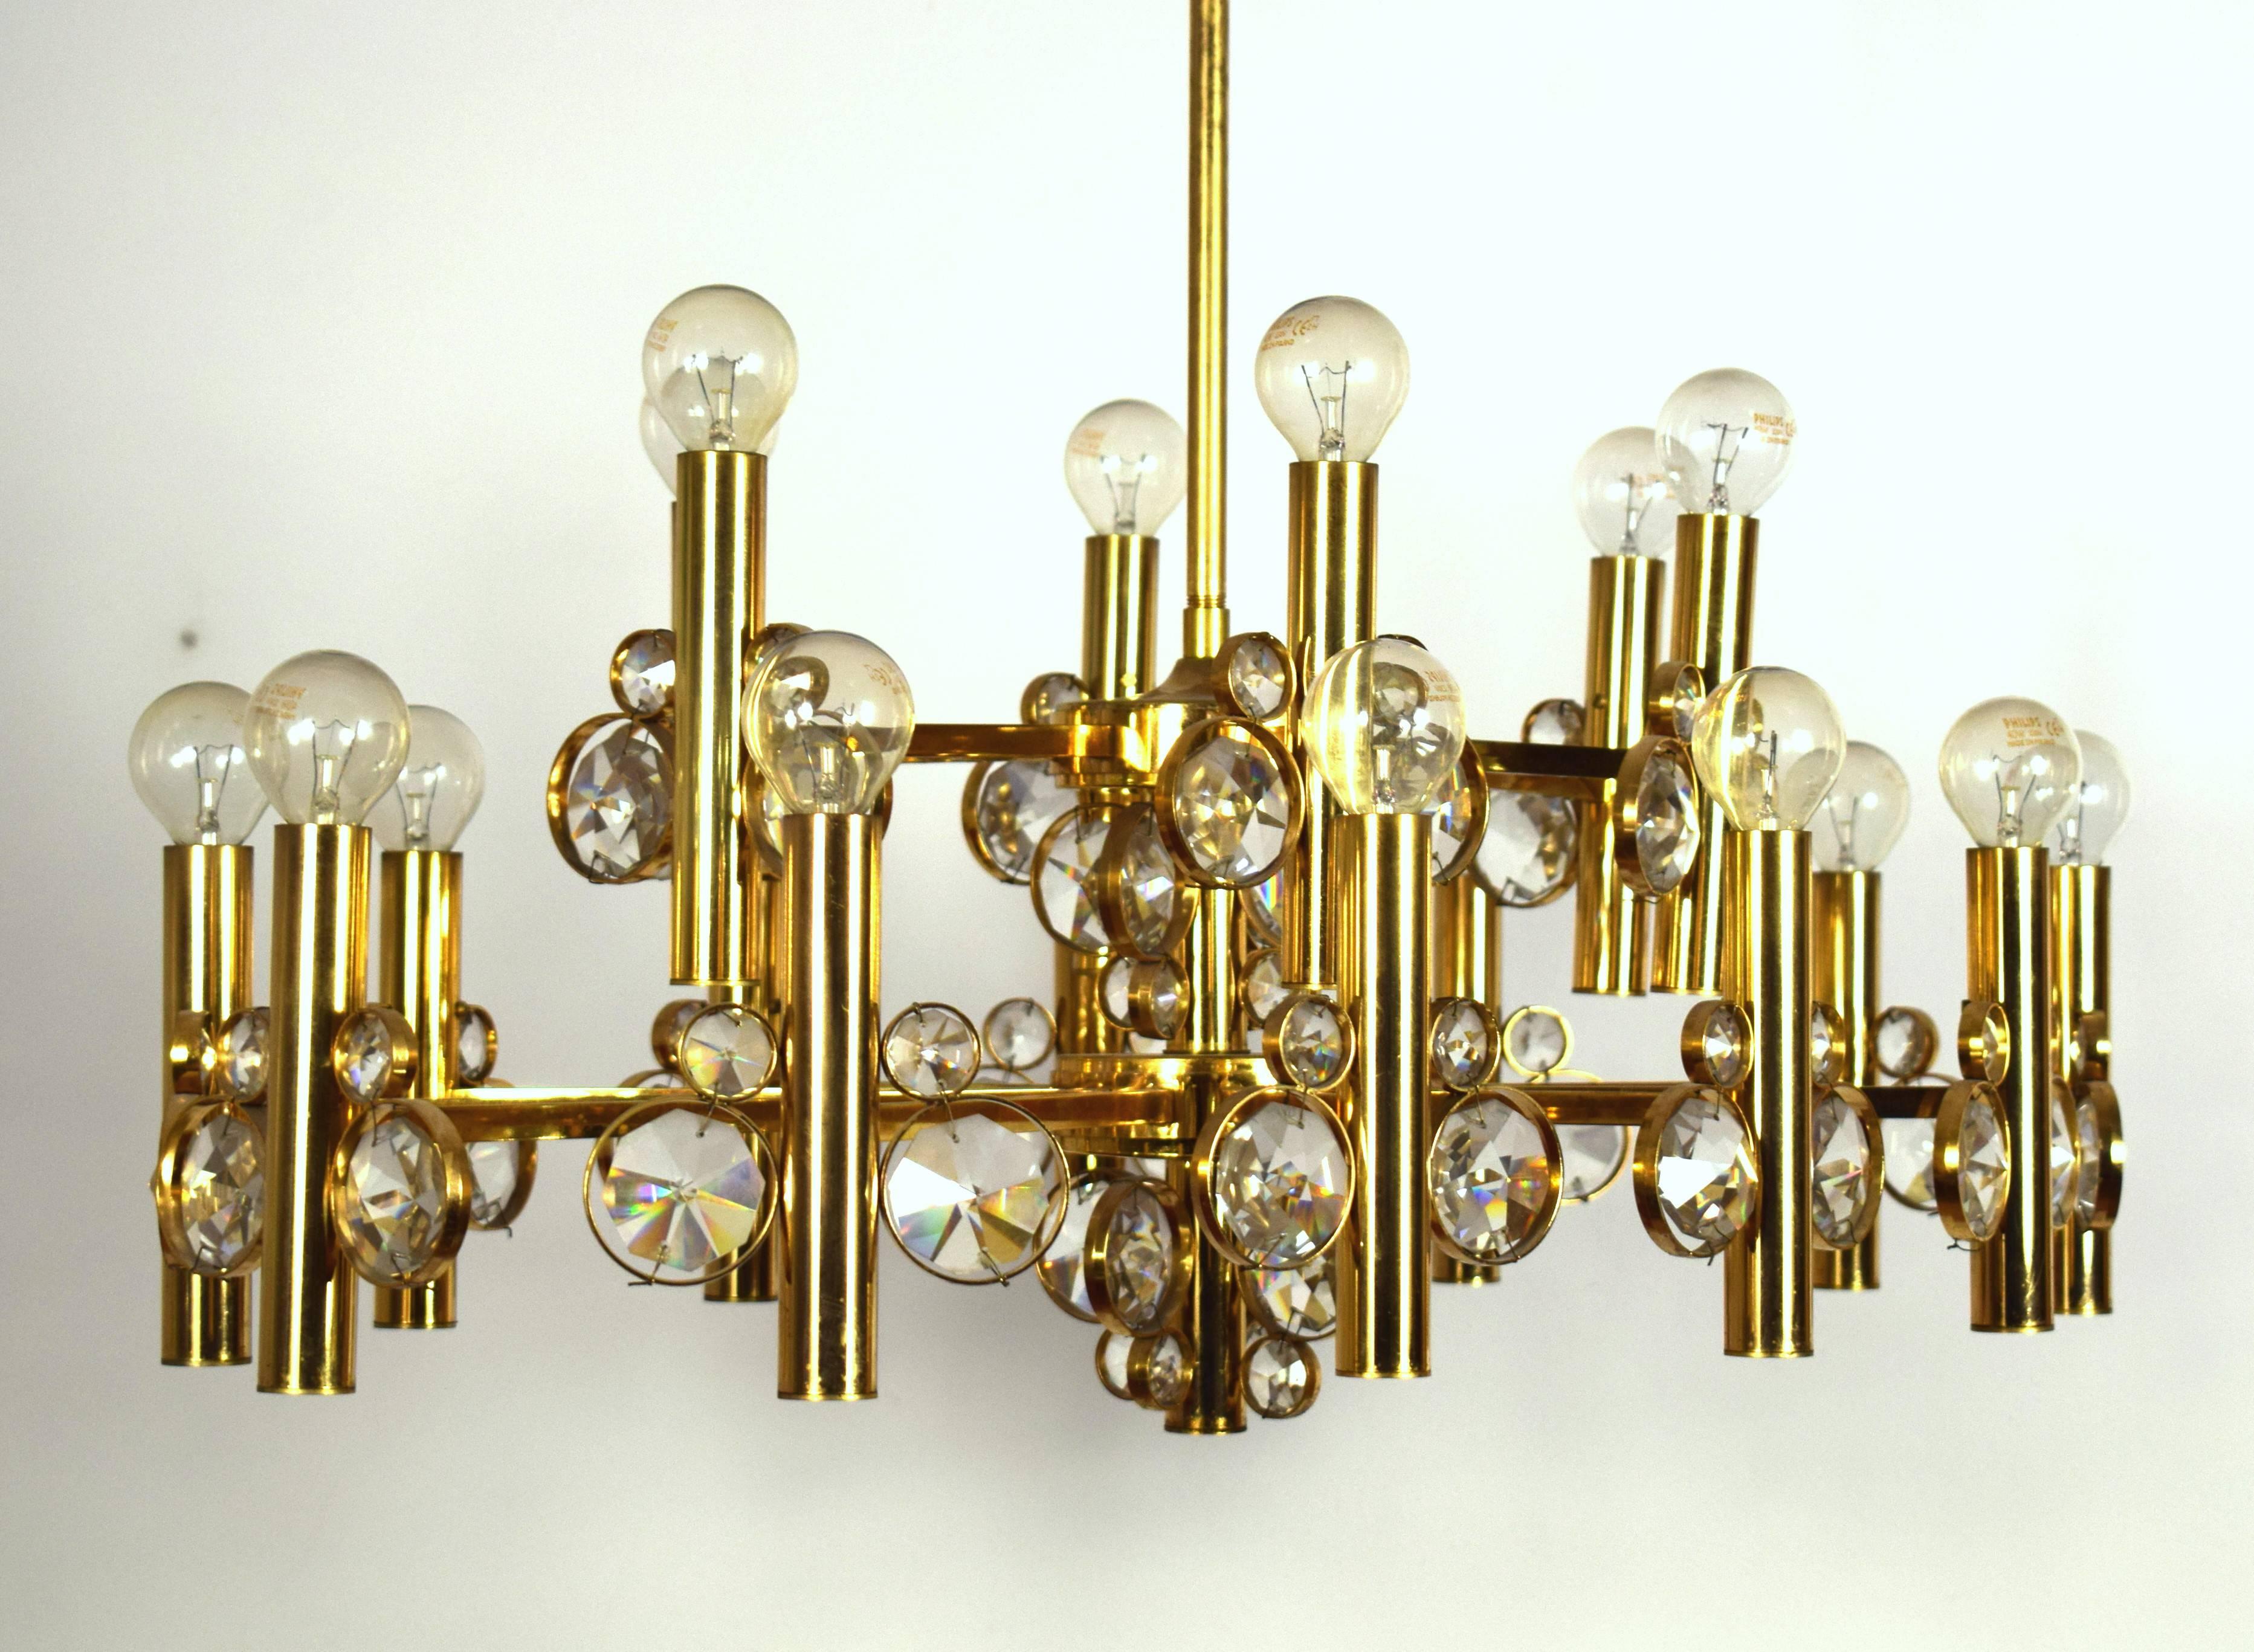 Very impressive eighteen-arm chandelier in the style of Bakalowits, Palwa or Sciolari, manufactured in 1970s. 
It is made of a gilded frame (oval shape) and diamond shaped crystals. 
The chandelier has 18 sockets for small base screw bulbs up to